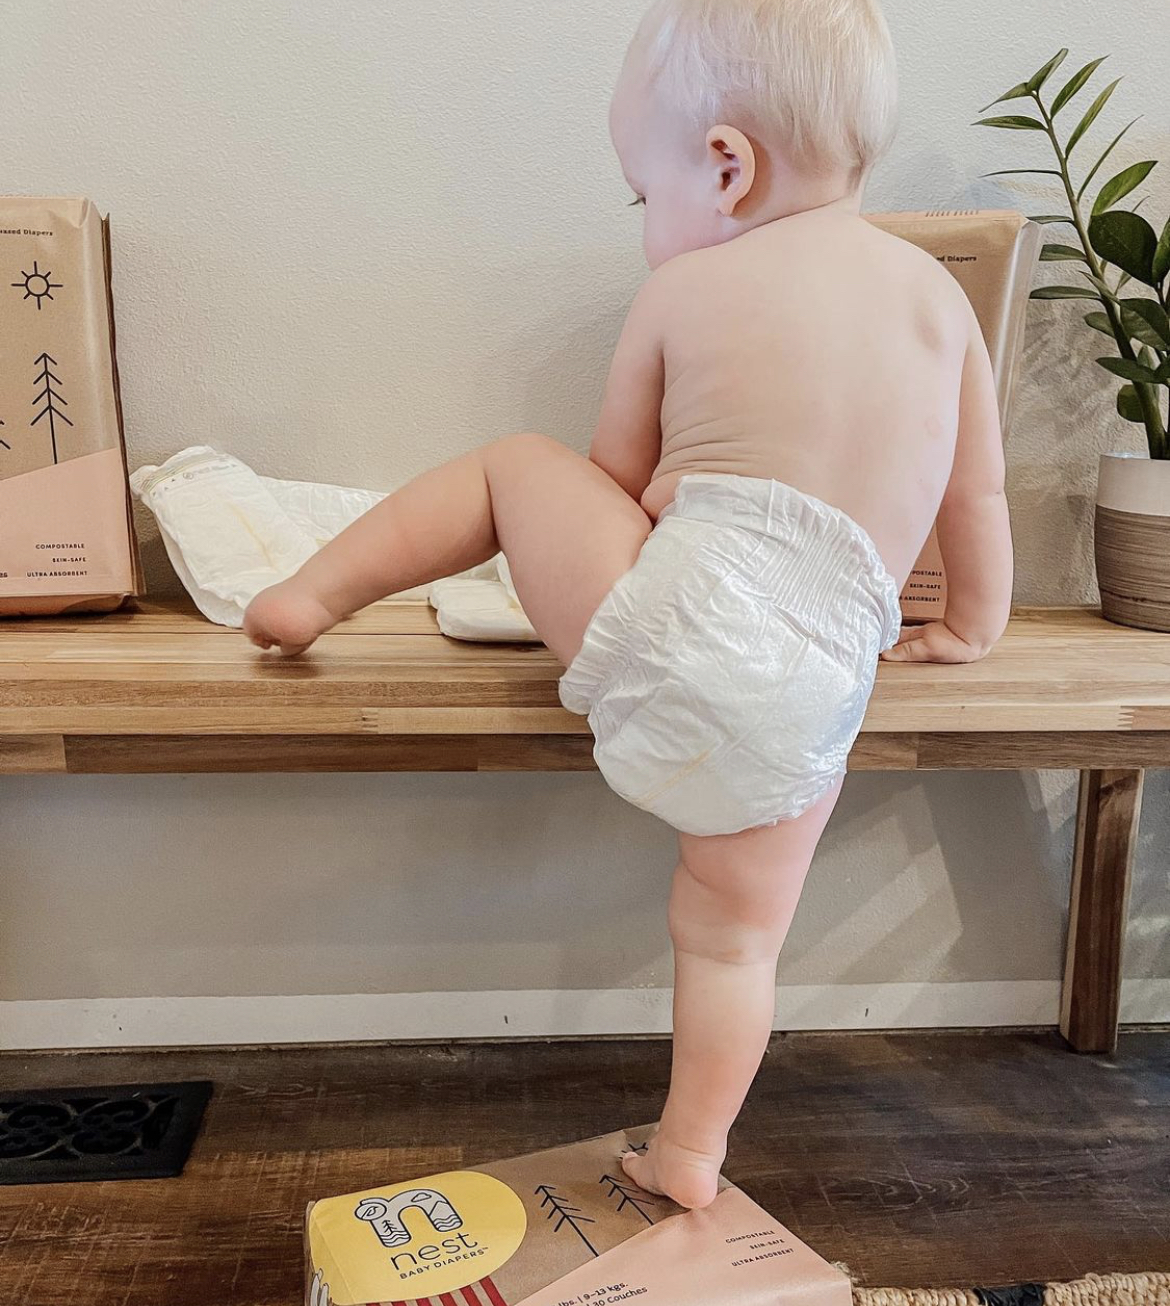 Paper Diaper: Waste-to-Energy Service